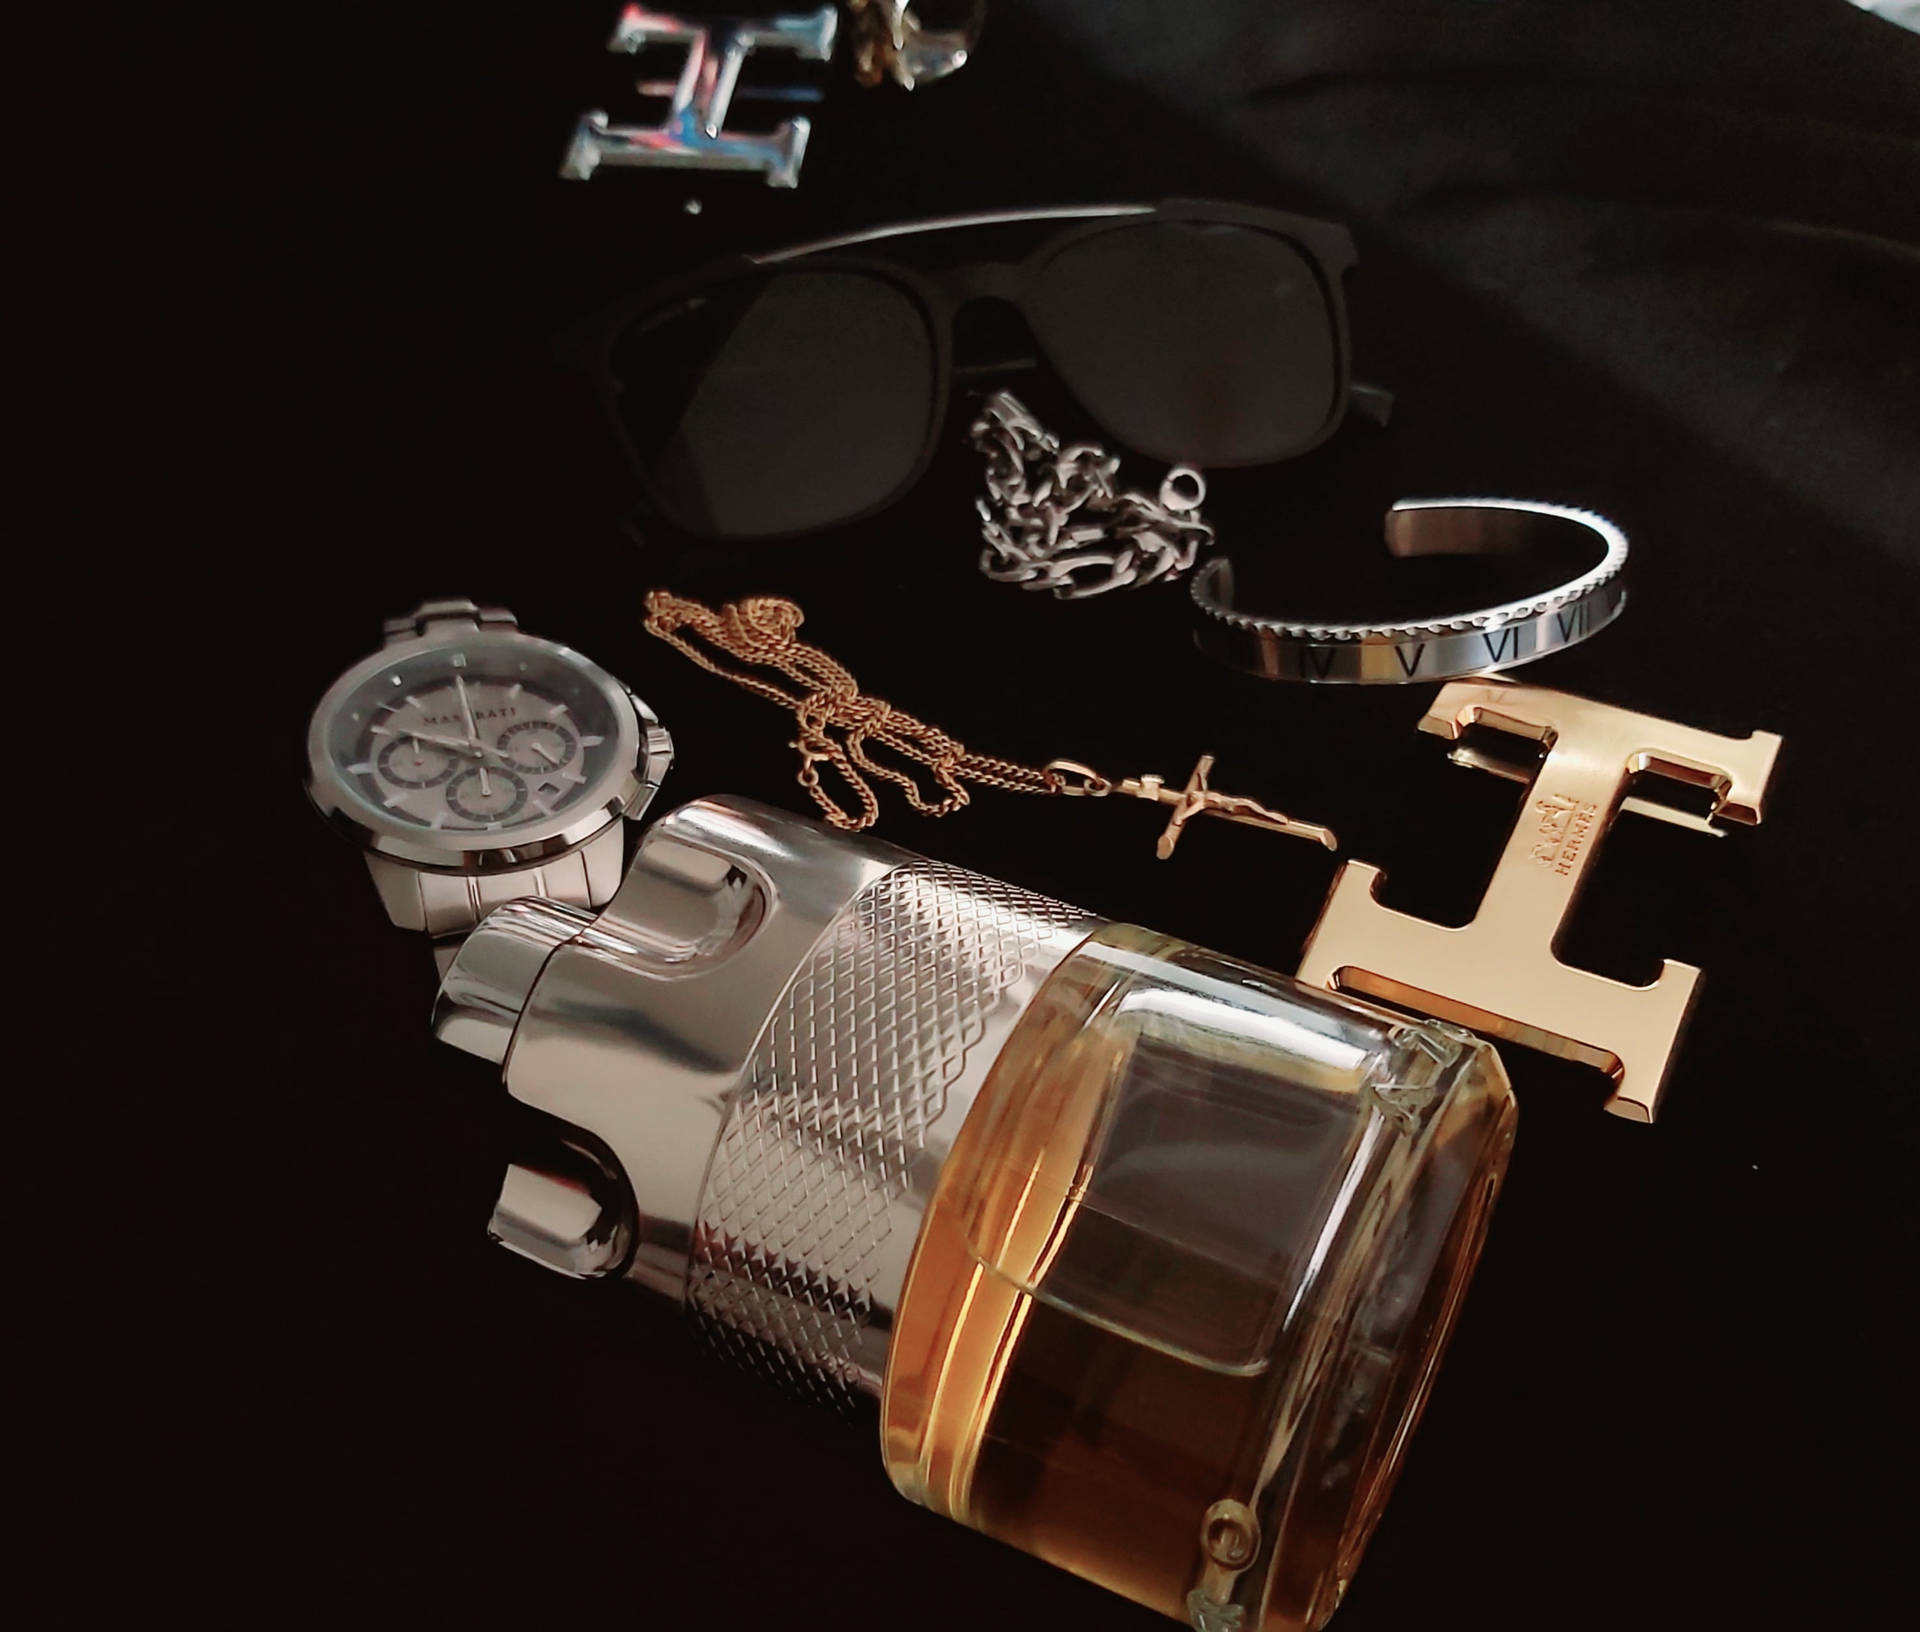 Hermes Accessories And Perfume Background